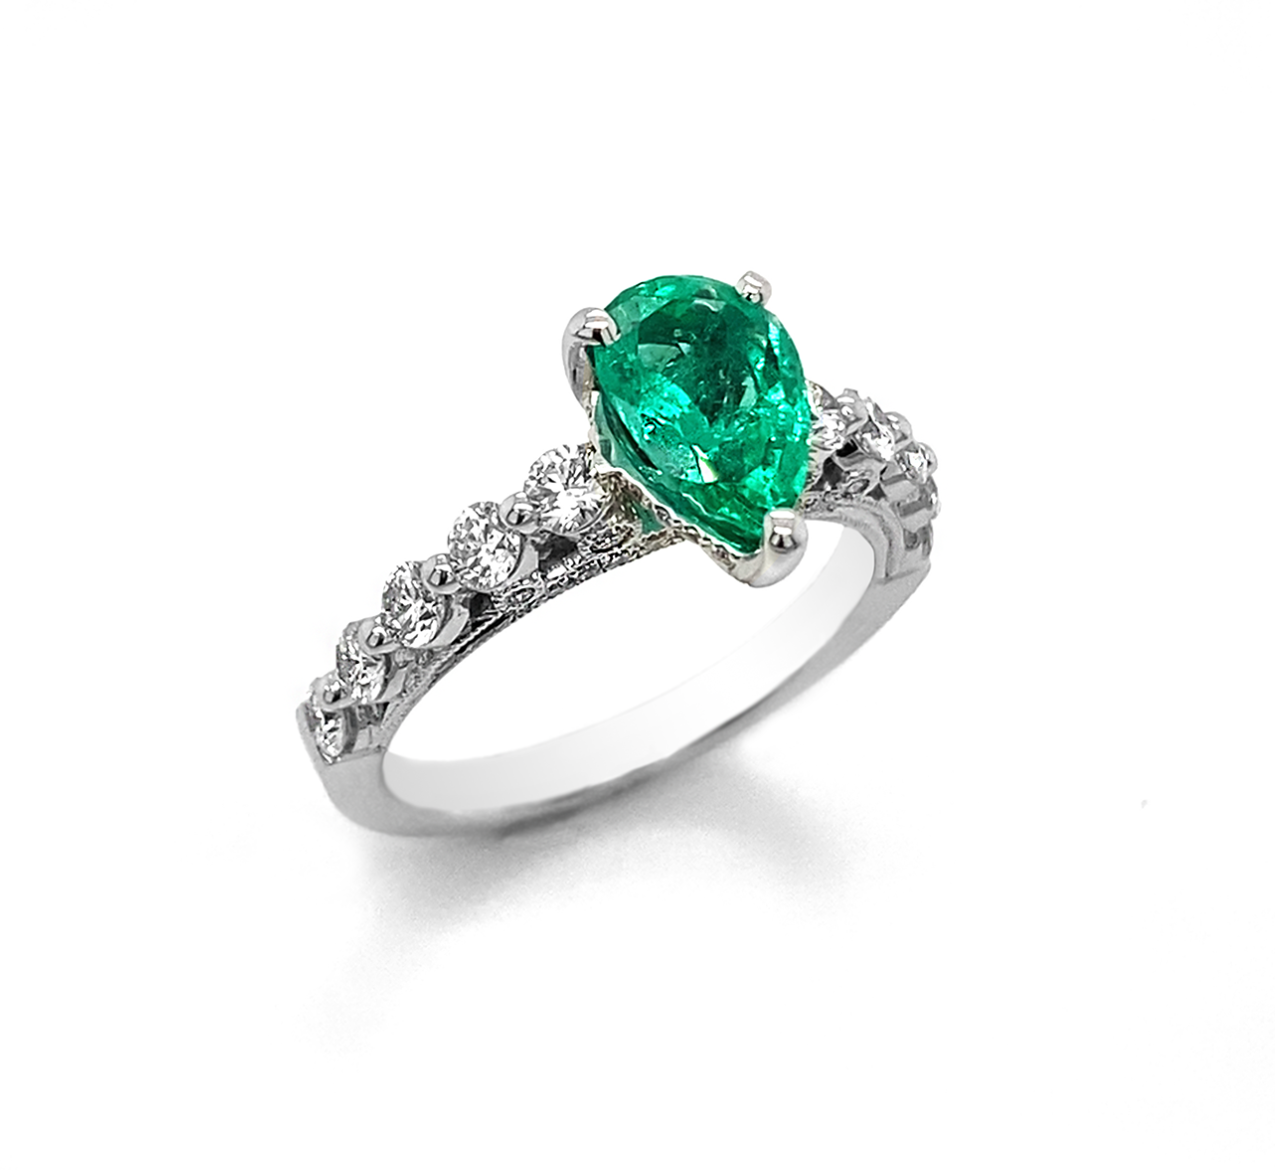 3 carat Emerald Ring with Triangle Side Diamonds White Gold | Style 5620W |  PIERRE Jewellery - order now in India